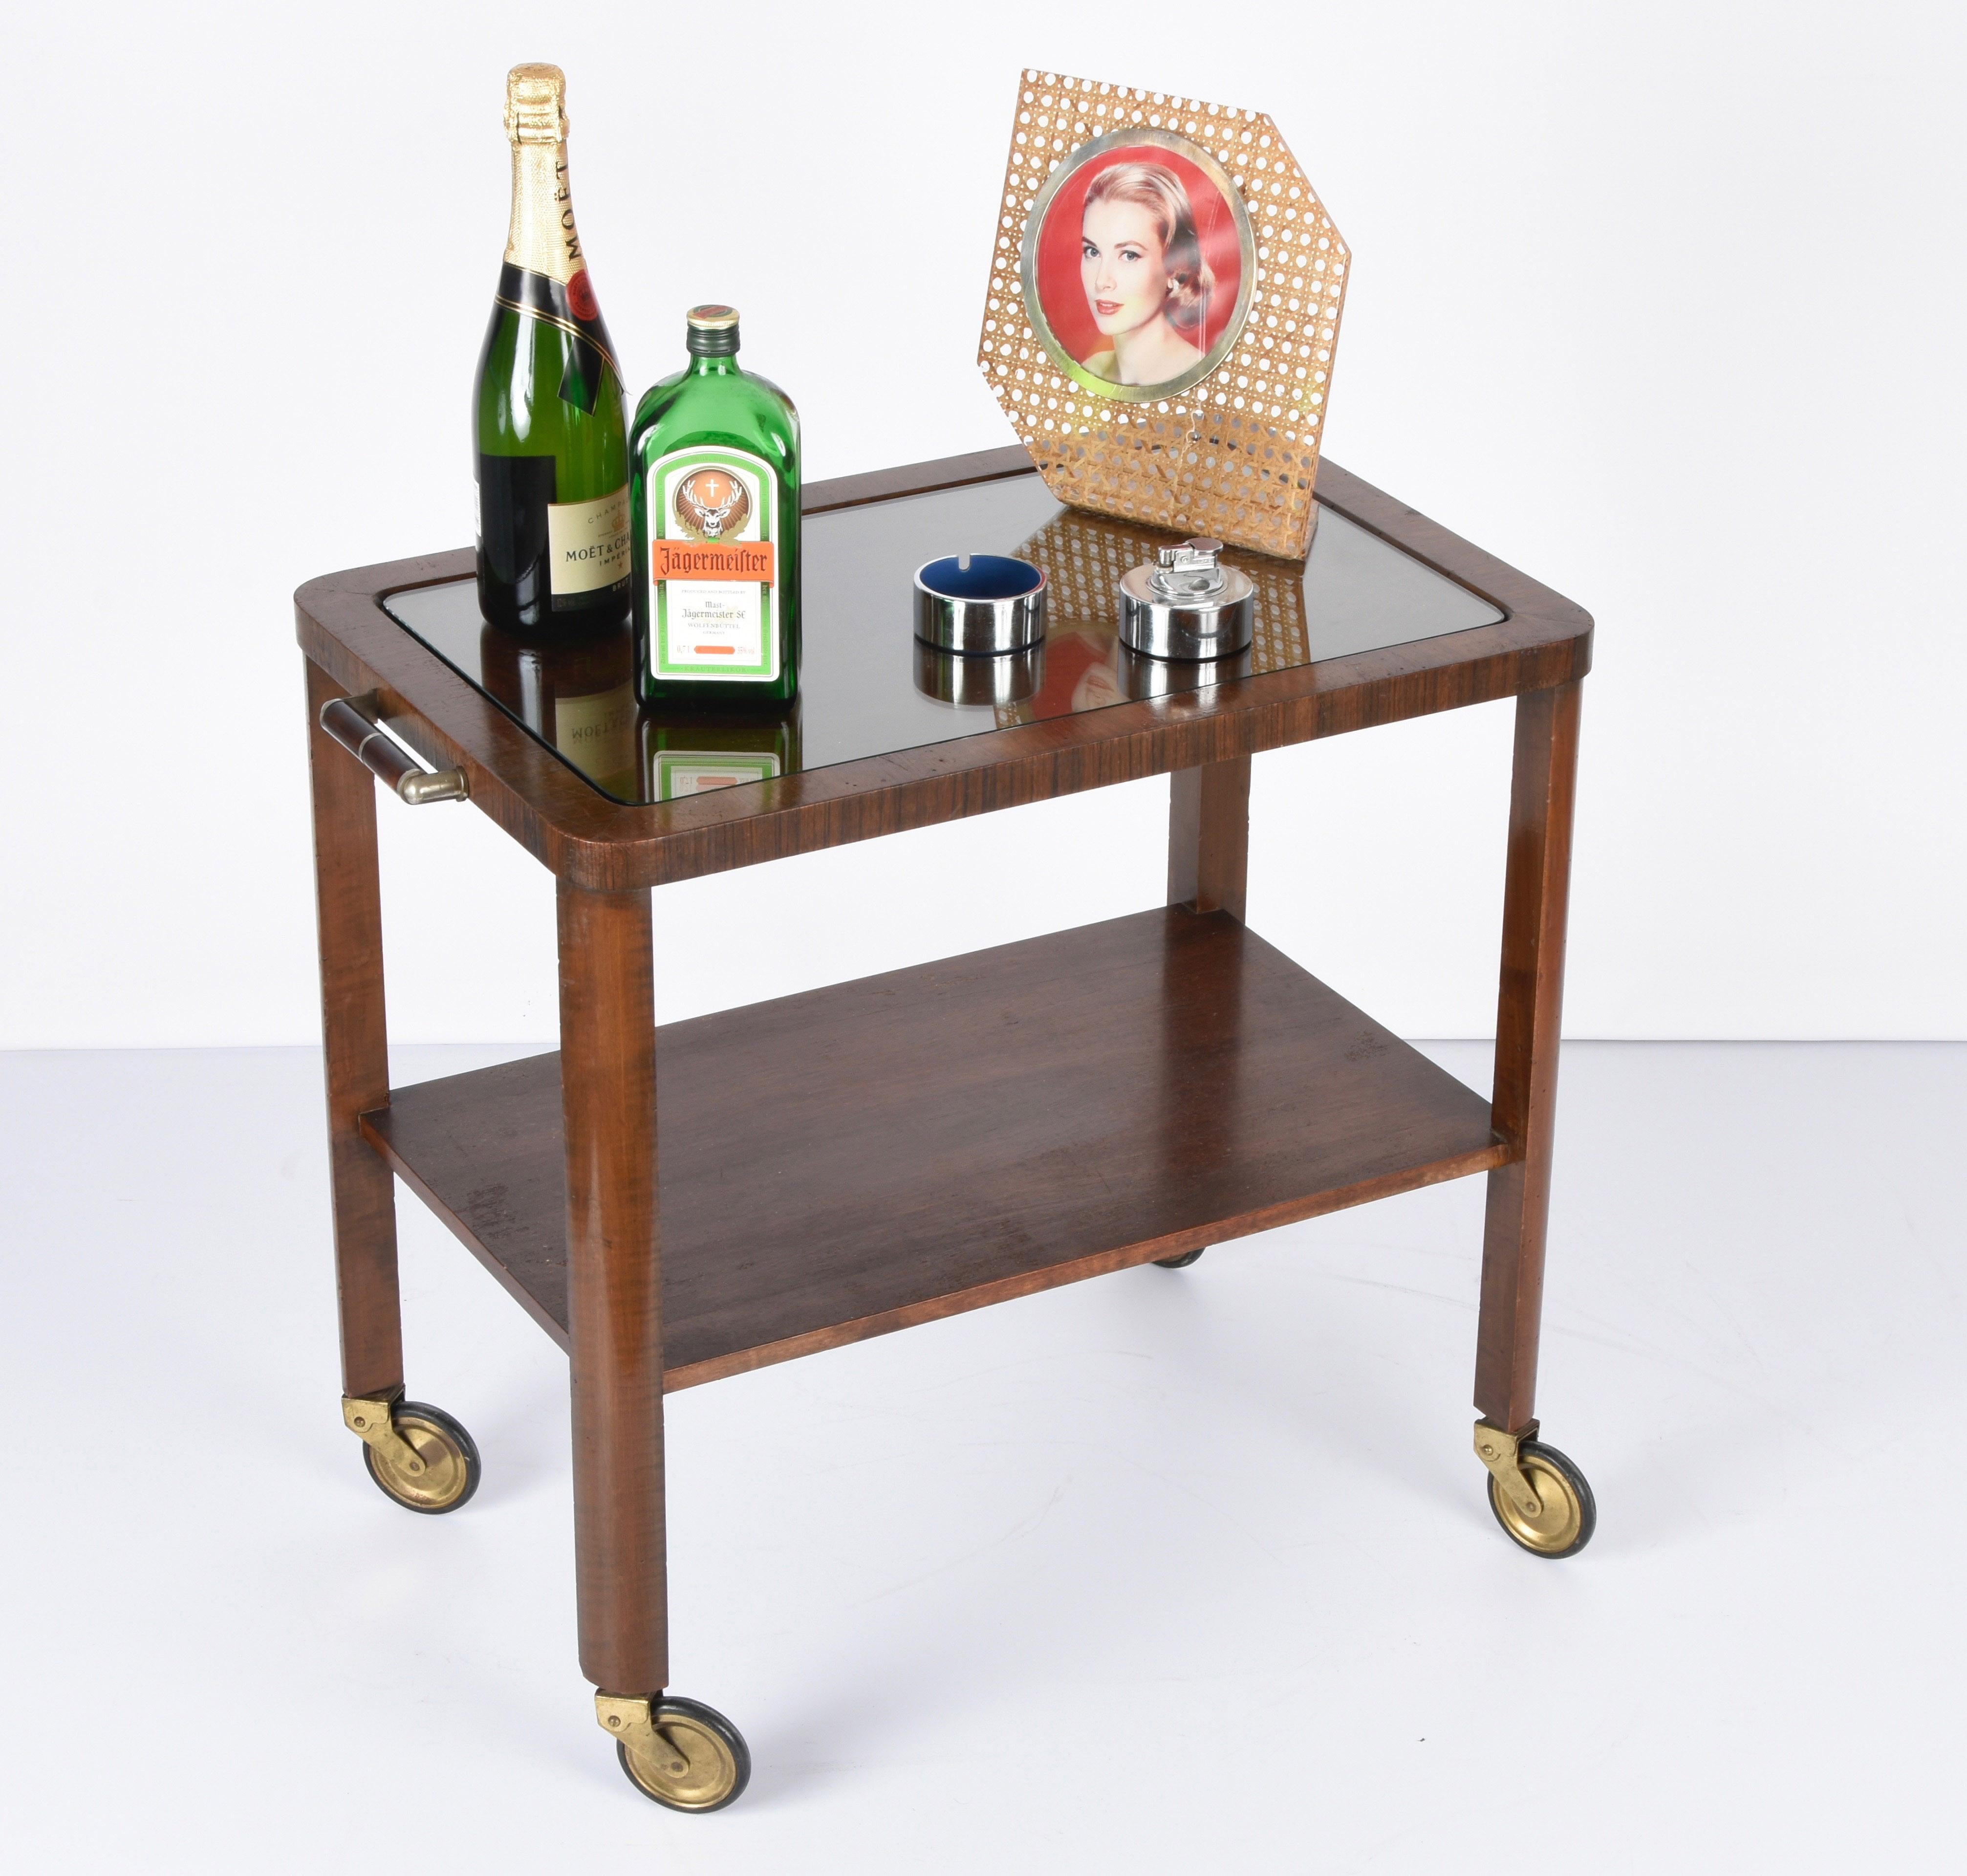 Art Deco Solid Walnut Wood and Glass Two-Levels Italian Trolley Bar Cart, 1940s For Sale 8